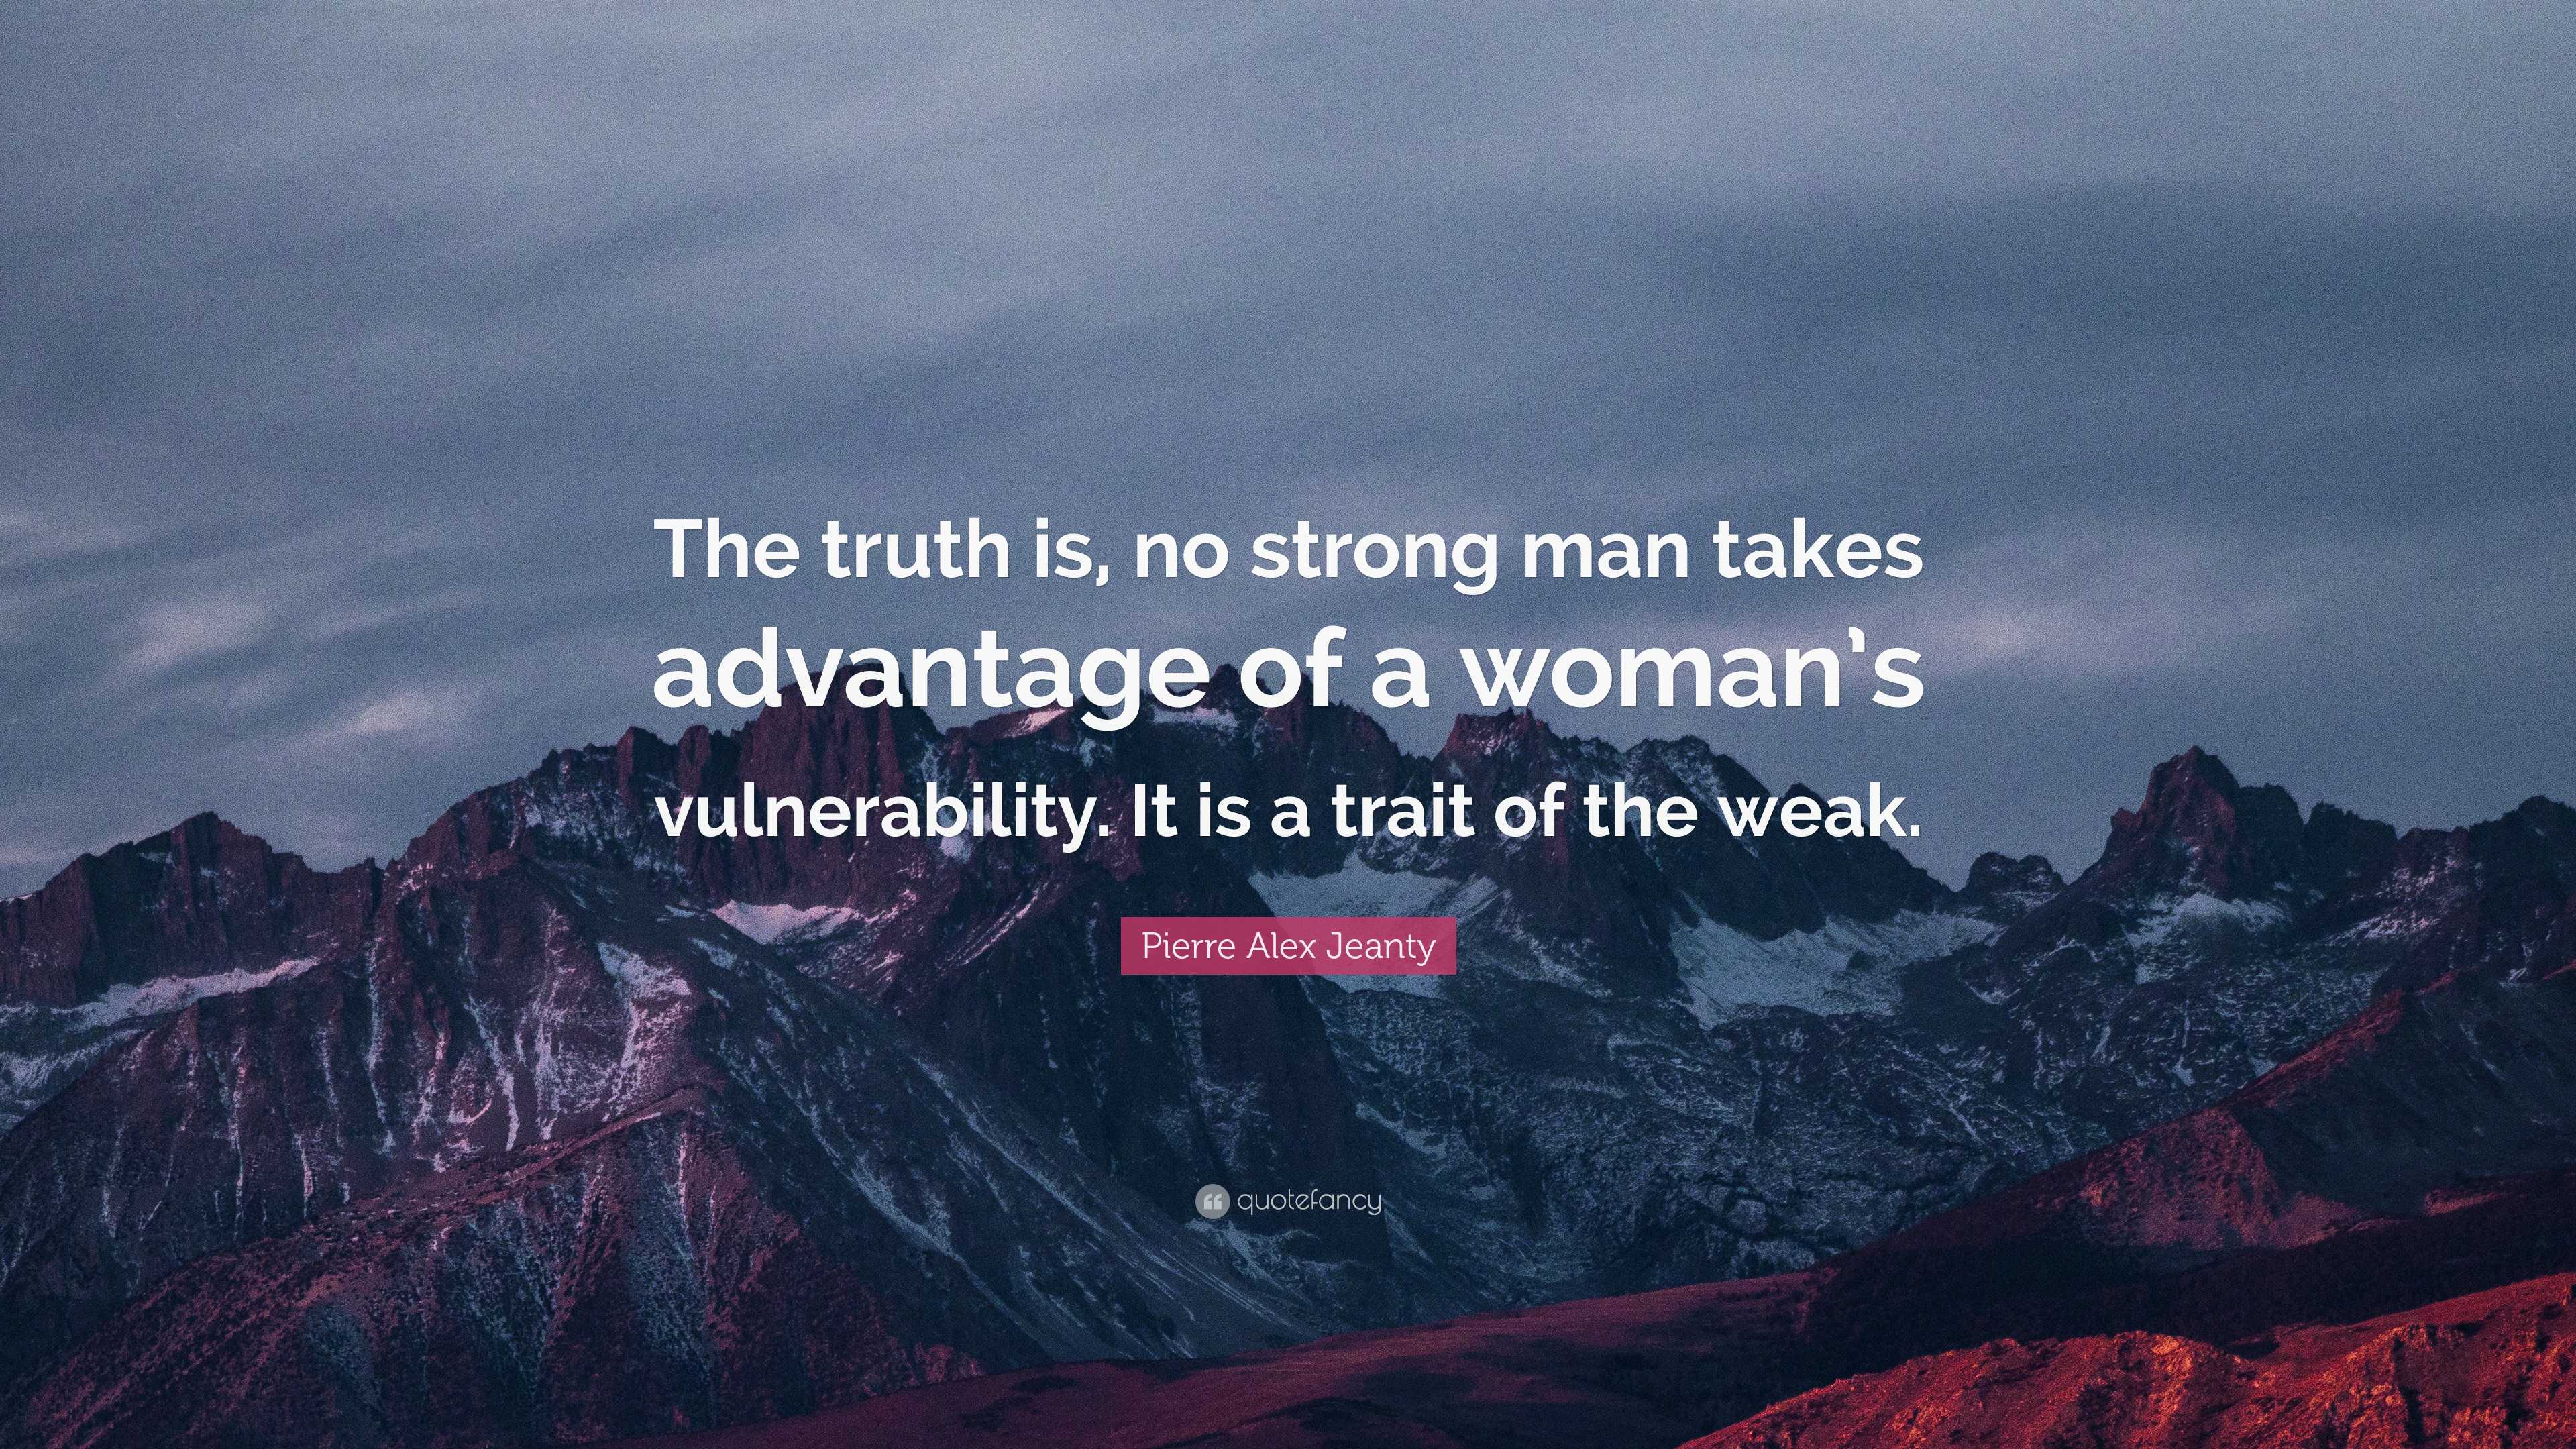 Pierre Alex Jeanty Quote: “The truth is, no strong man takes advantage ...